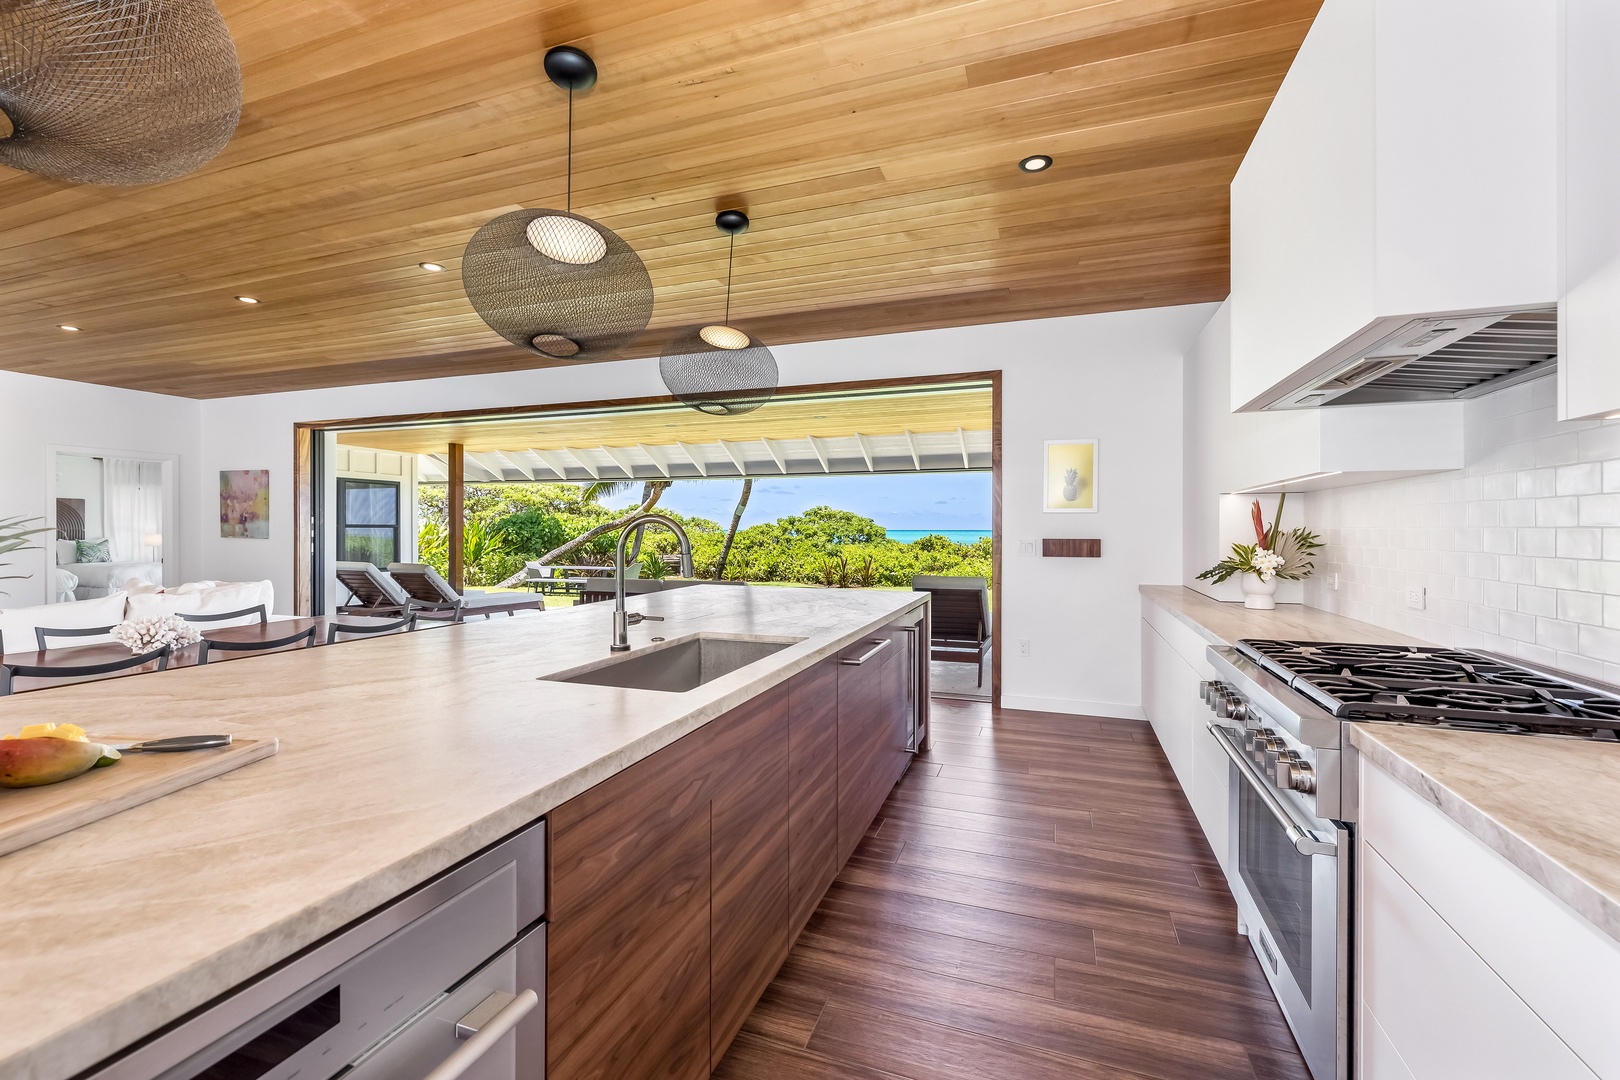 Kailua Vacation Rentals, Kailua Beach Villa - State-of-the-art kitchen amenities await your culinary touch.